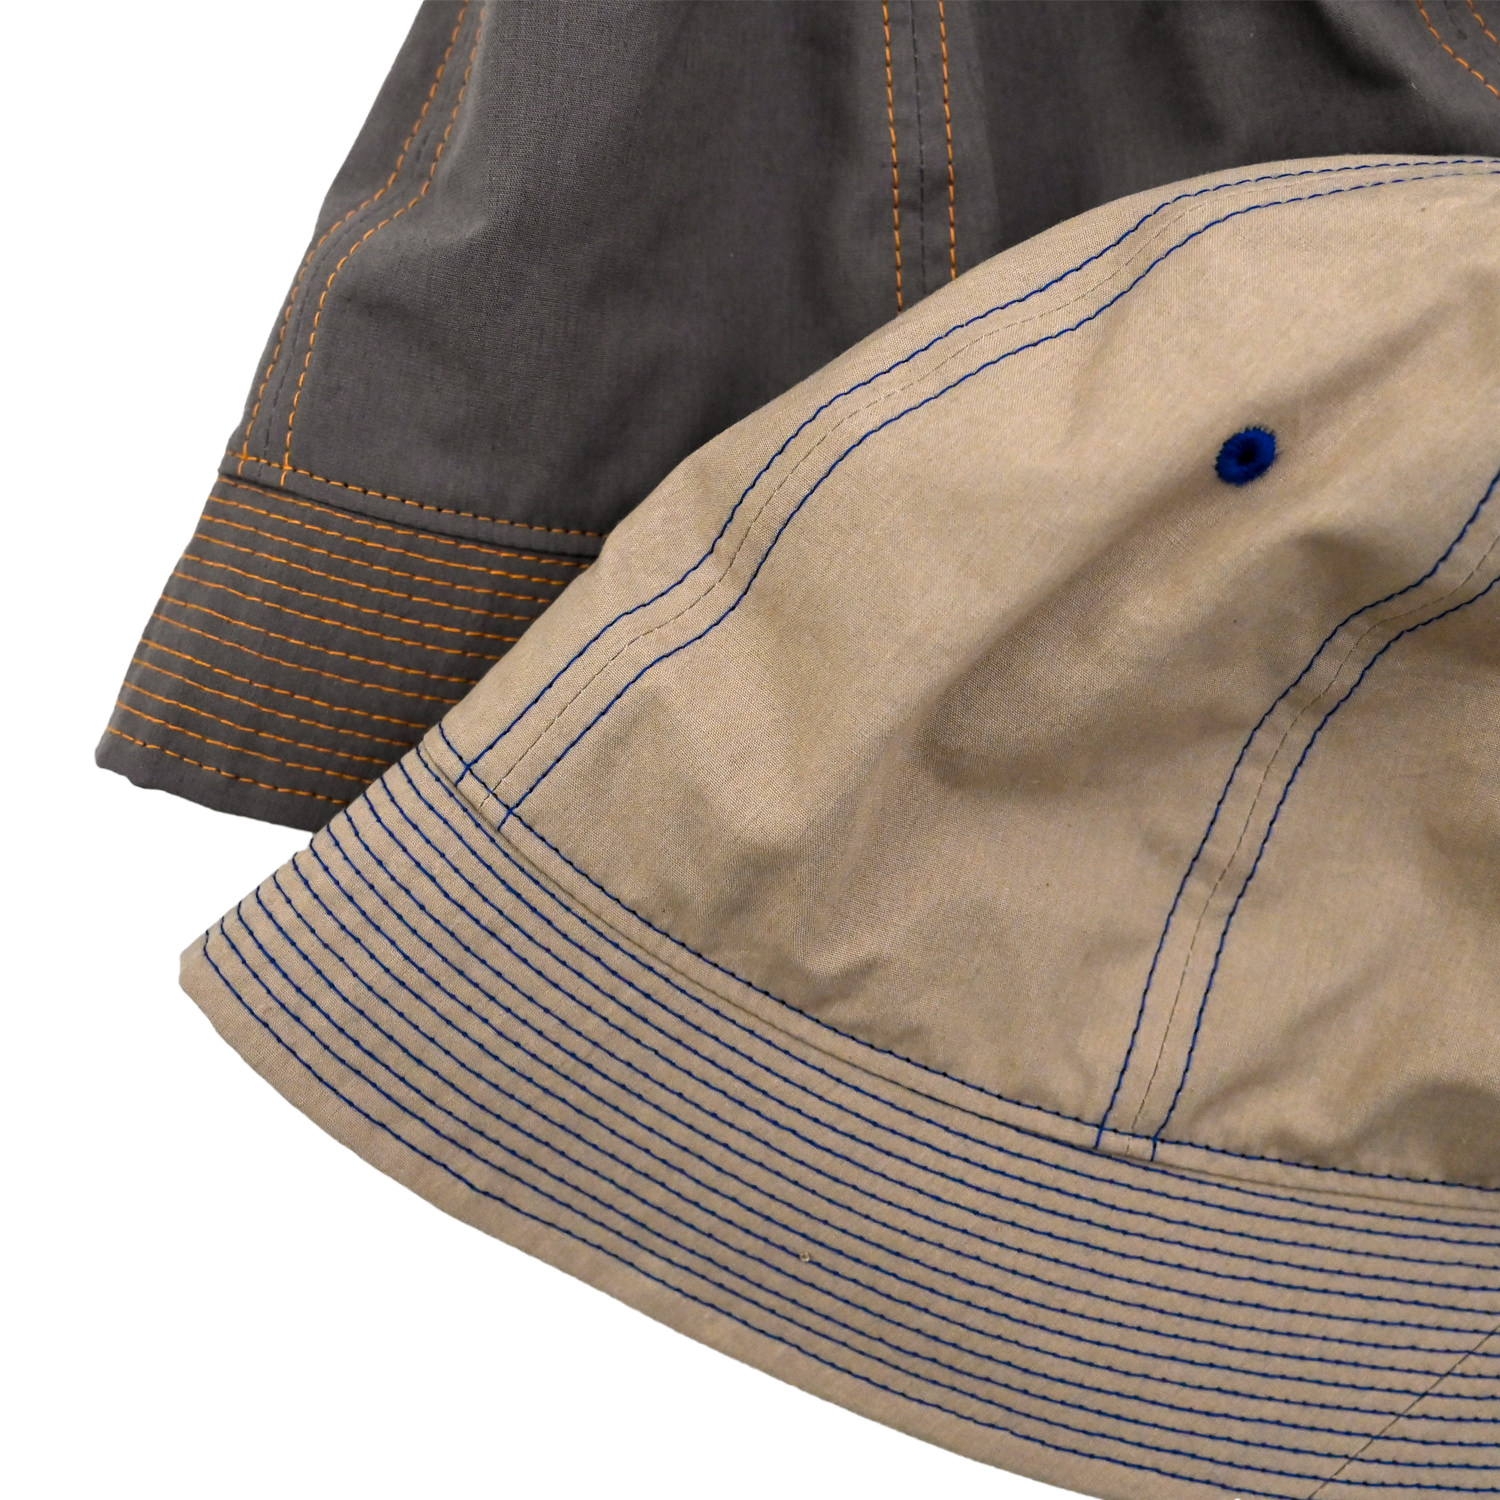 NOROLL (DETOURS WASHI HAT) 通販 ｜ SUPPLY TOKYO online store